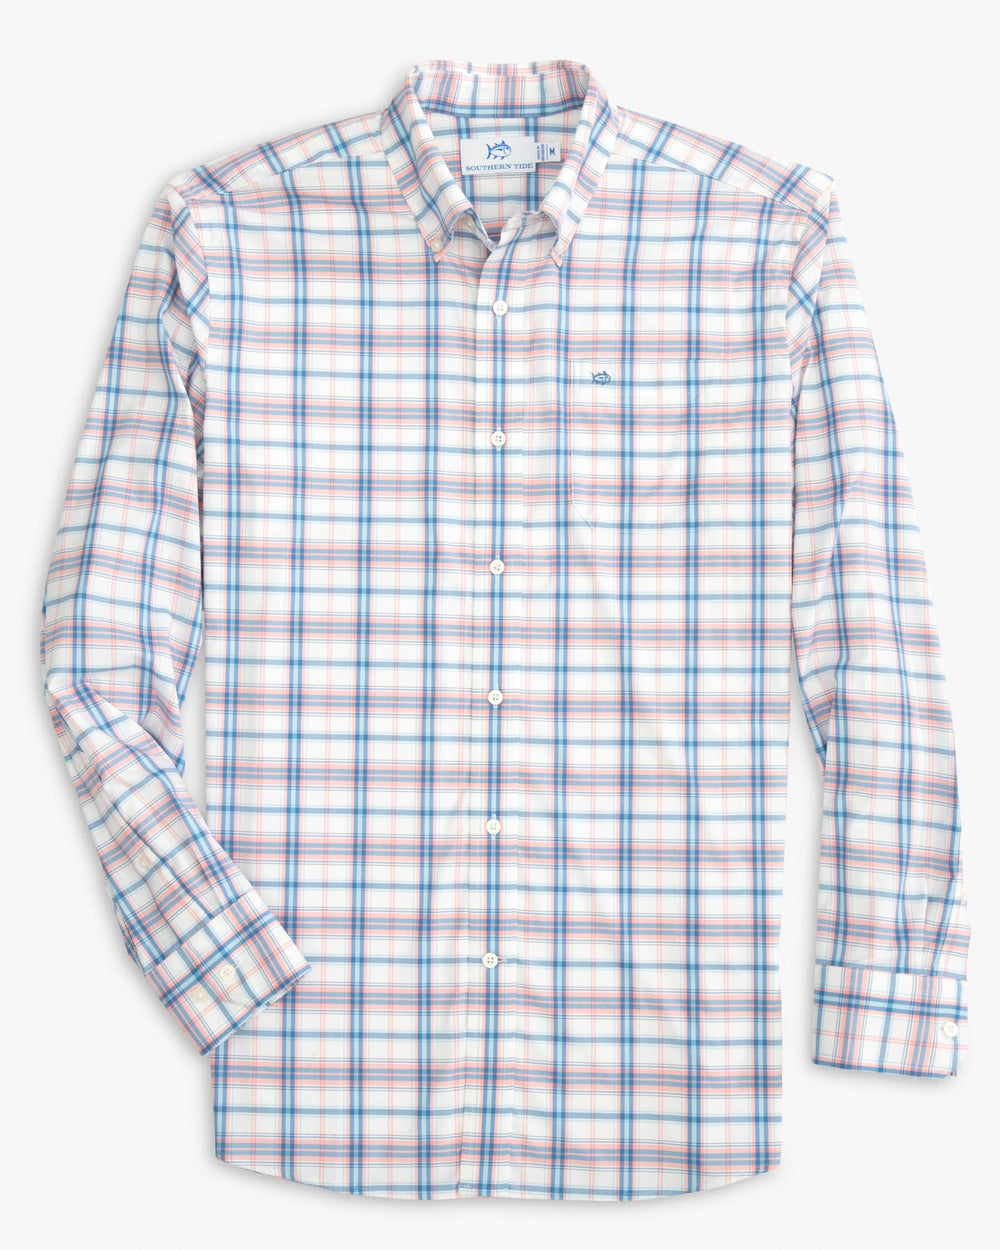 The front view of the Southern Tide Sapelo Plaid Intercoastal Sport Shirt by Southern Tide - Flamingo Pink